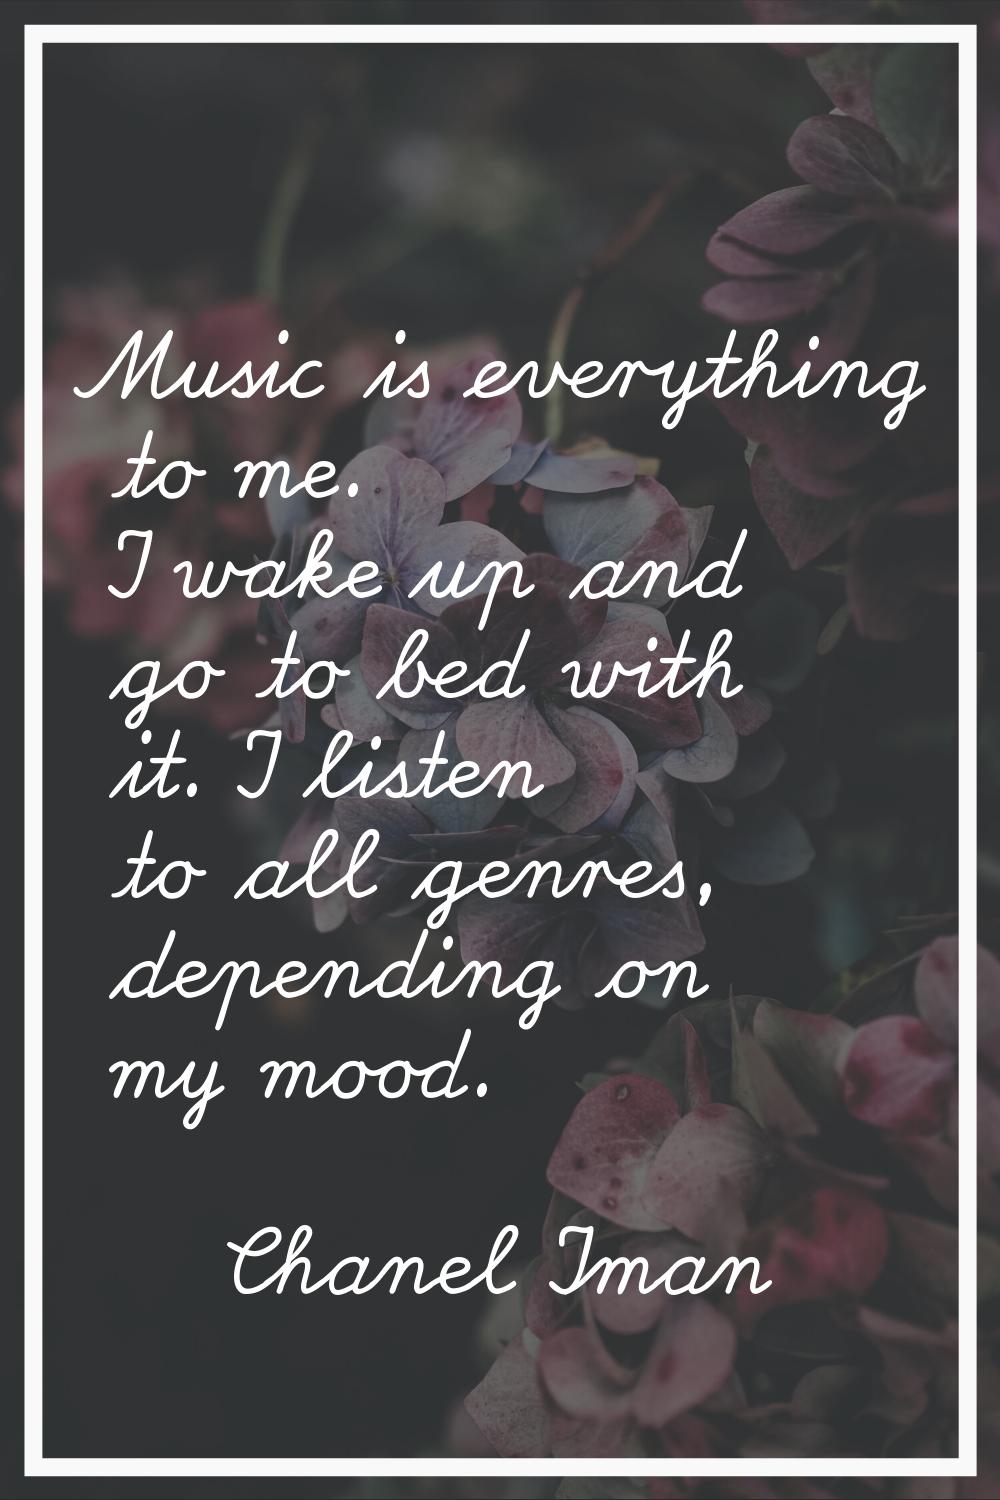 Music is everything to me. I wake up and go to bed with it. I listen to all genres, depending on my